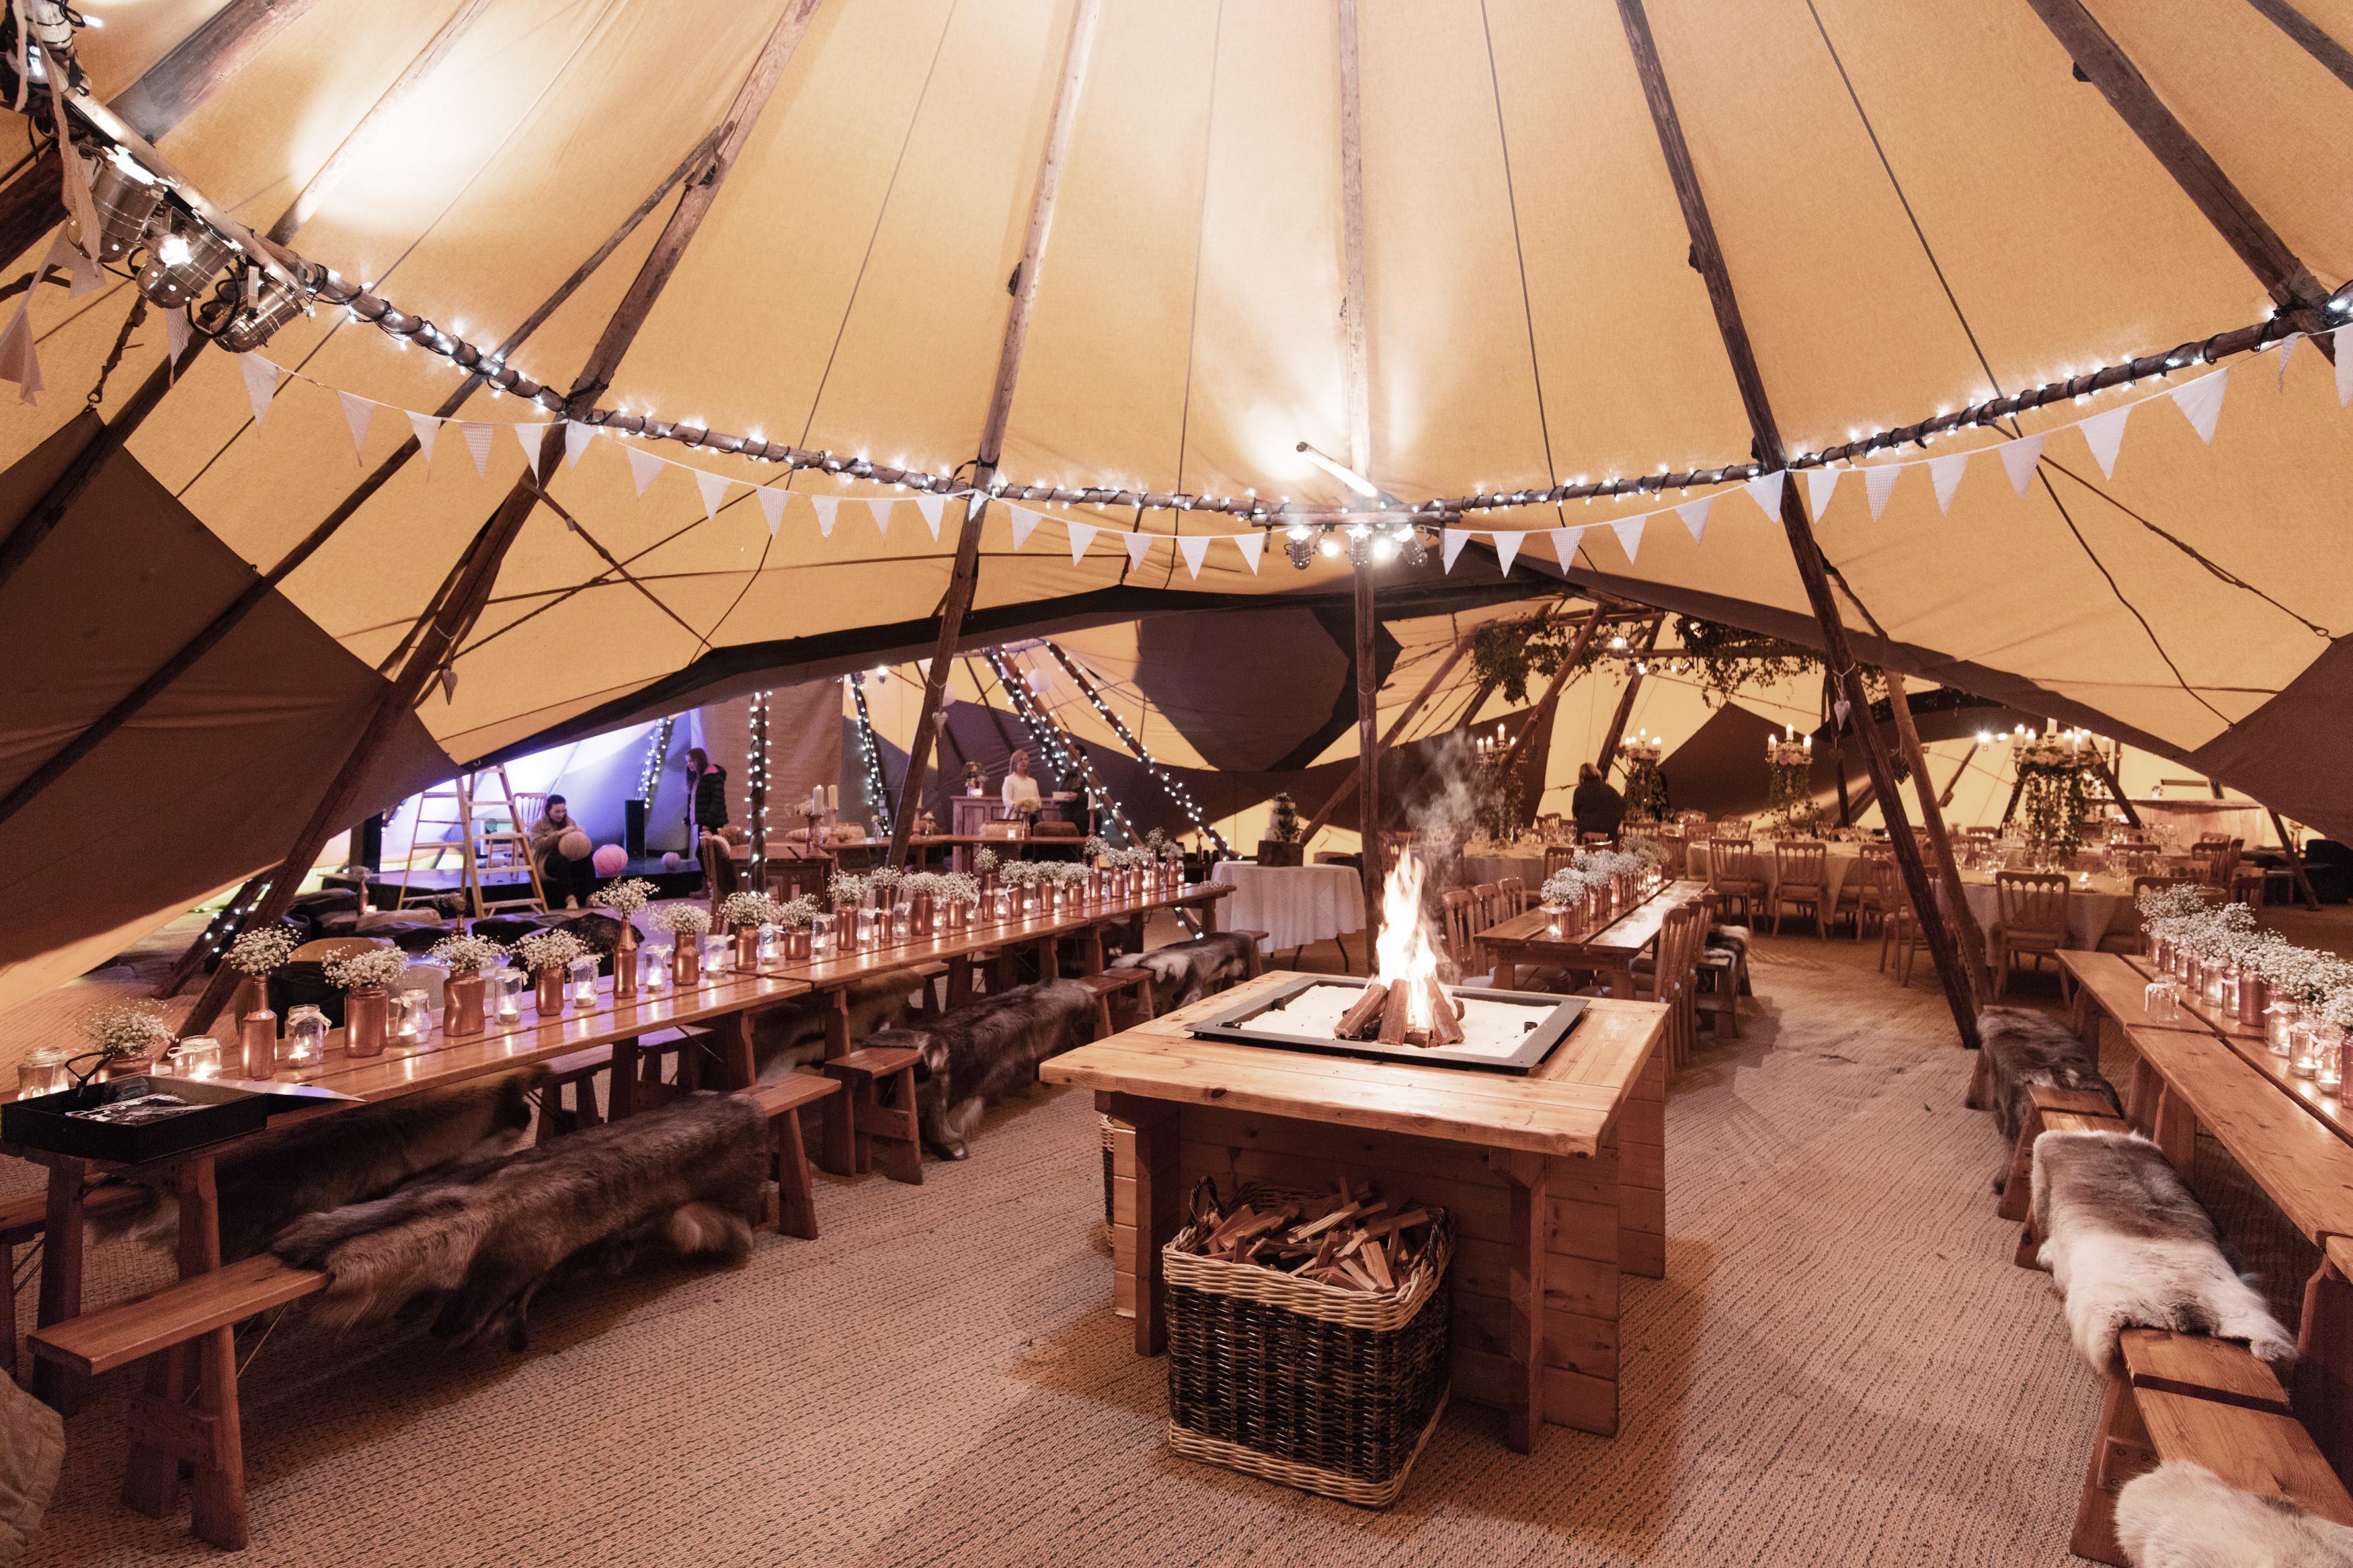 PAGE PRODUCT FURNISHINGS Beautiful World Tents Chris Giles Photography Large Fire edit